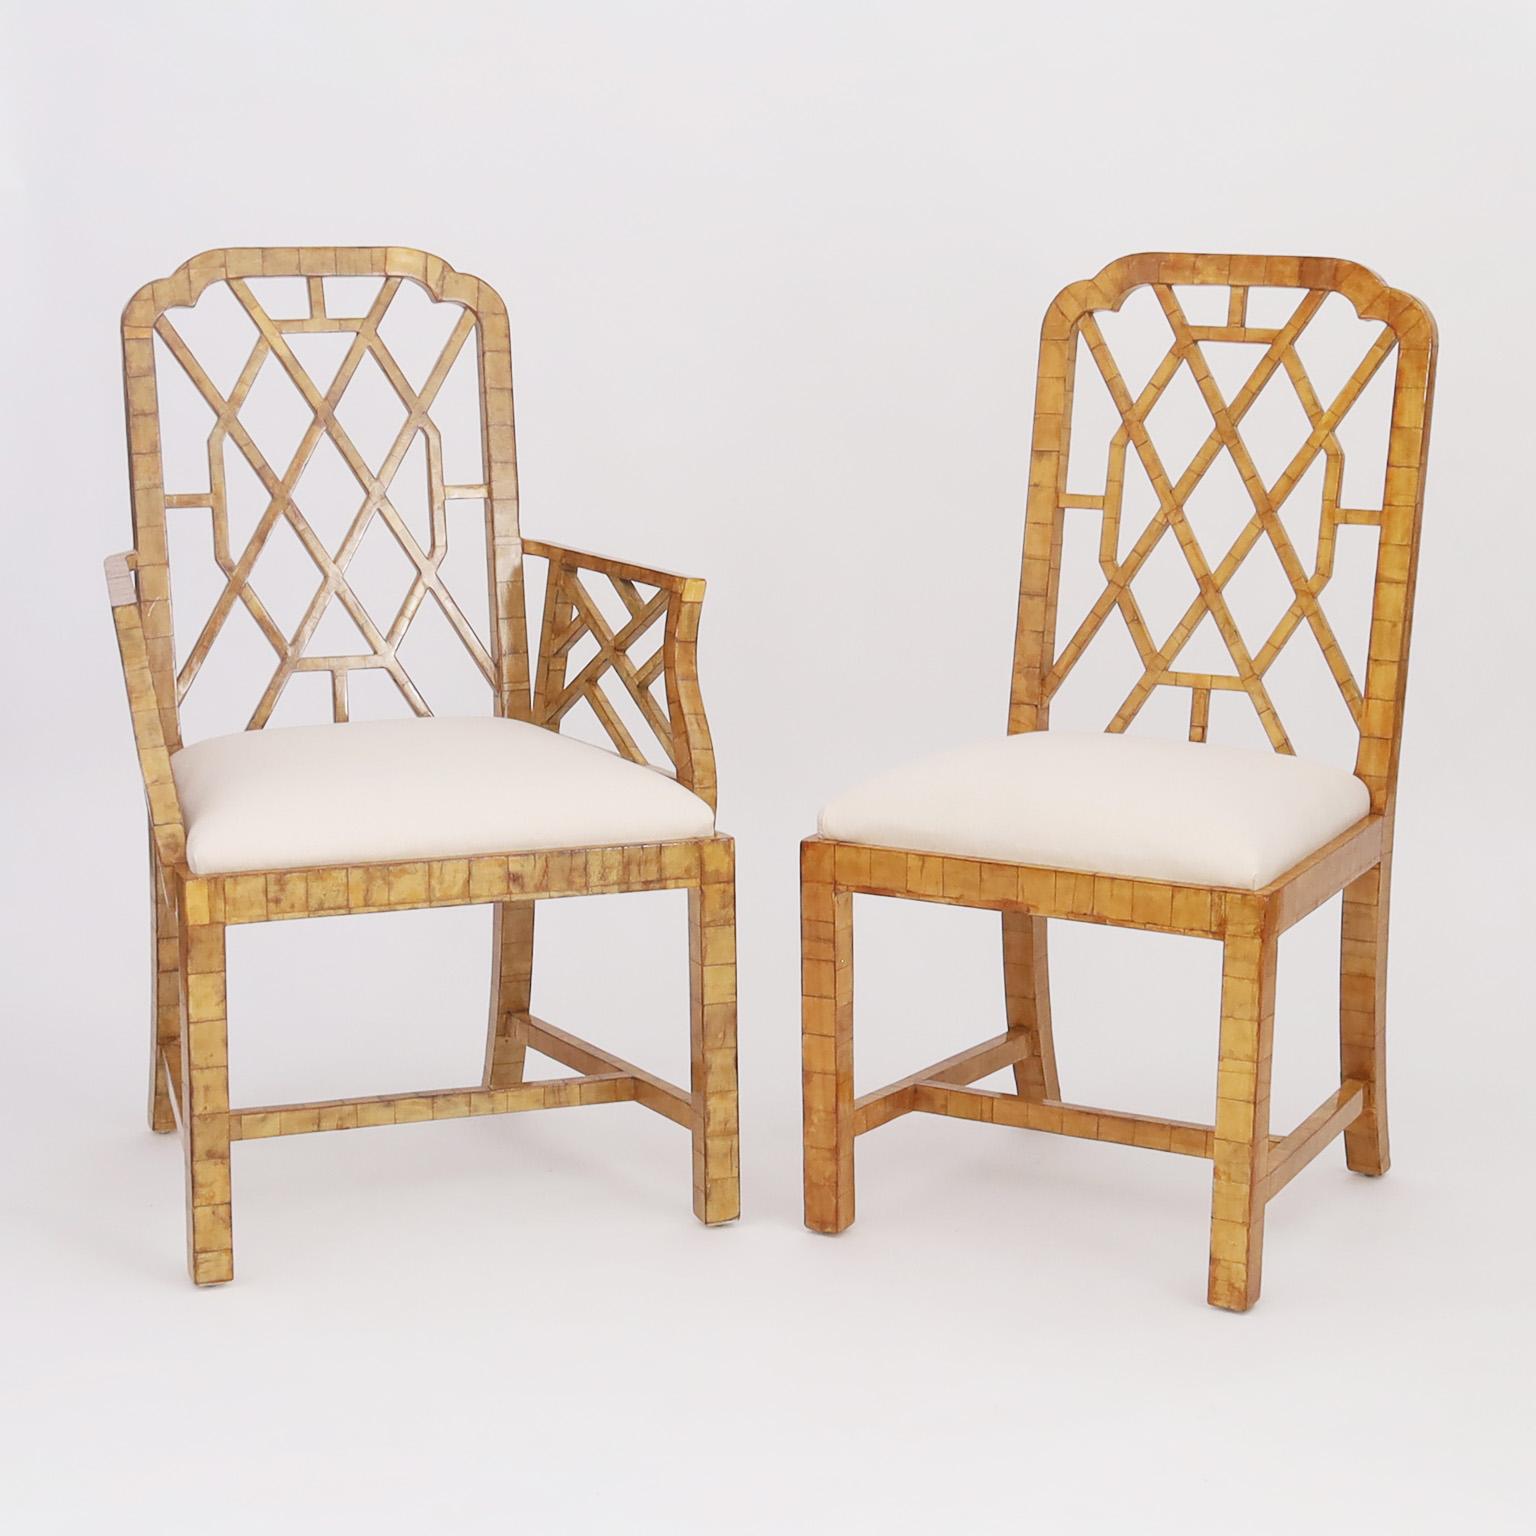 Impressive set of four Chinese Chippendale style dining chairs, two arm and two side entirely clad in a bone veneer mosaic.

Armchairs H: 39 W: 22.5 D: 18 
Side chairs H: 39 W: 19.5 D: 21 
Seat Height: 18.